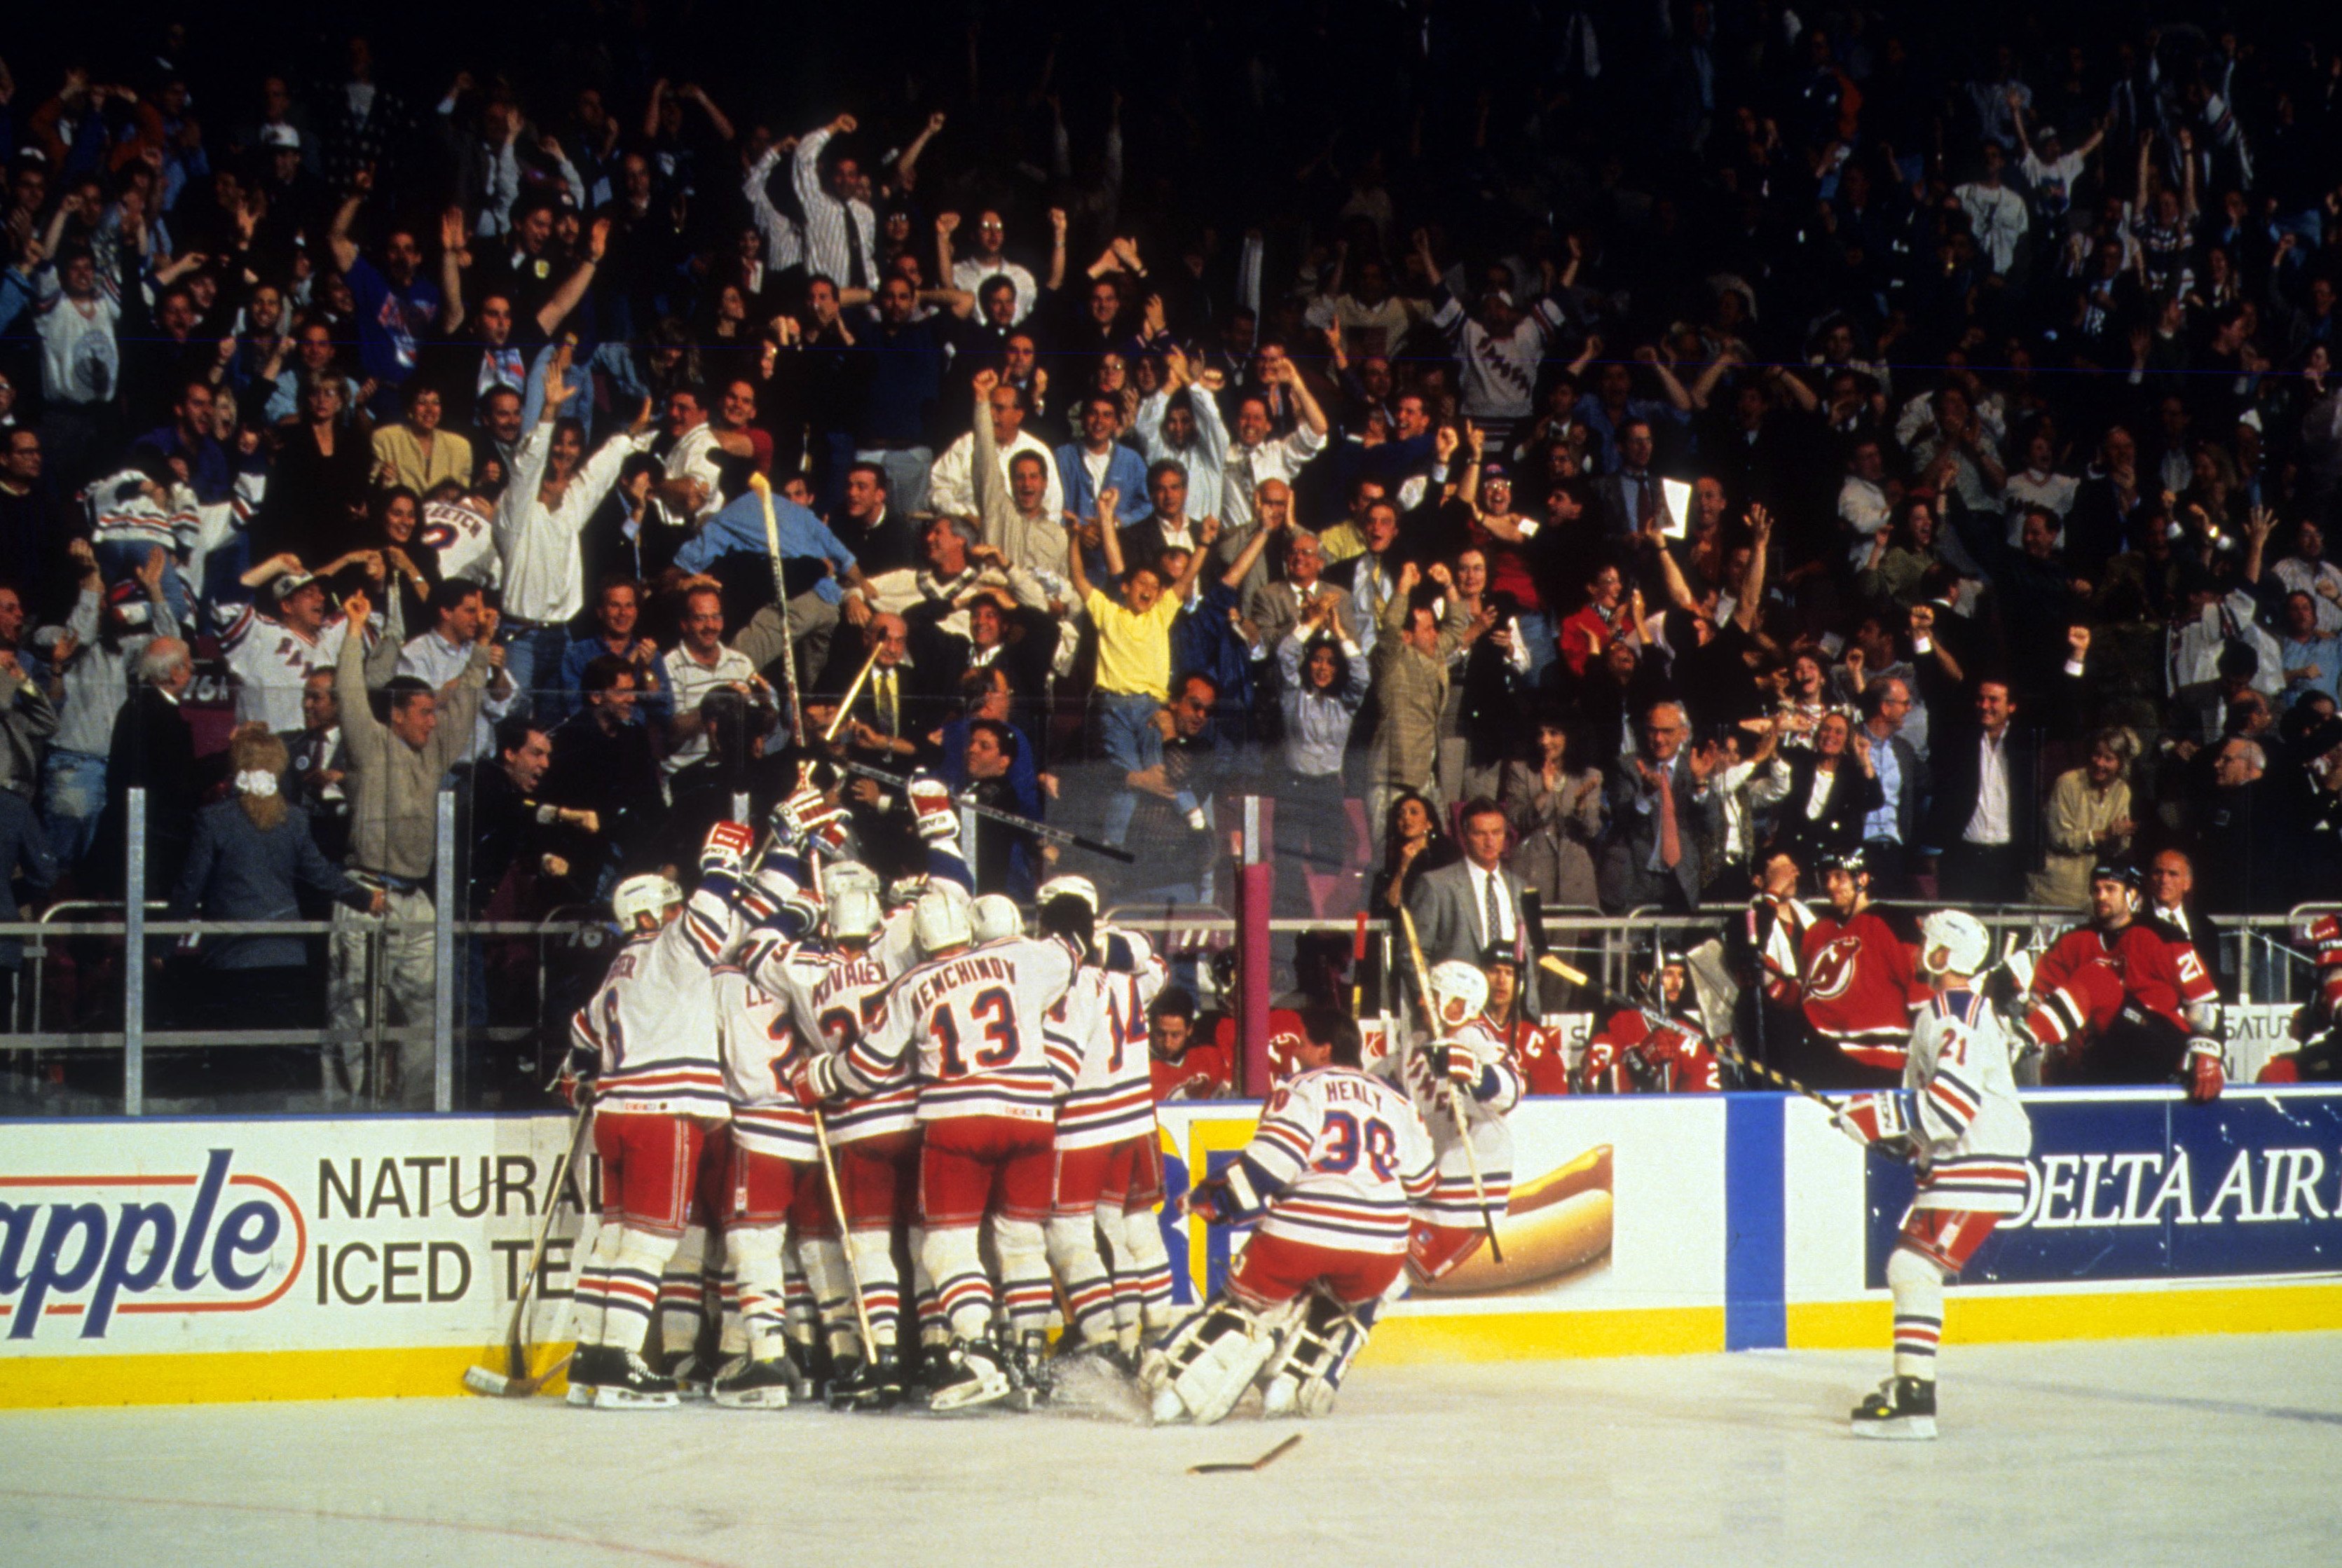 Friday marks the 25th anniversary of NY Rangers last Stanley Cup